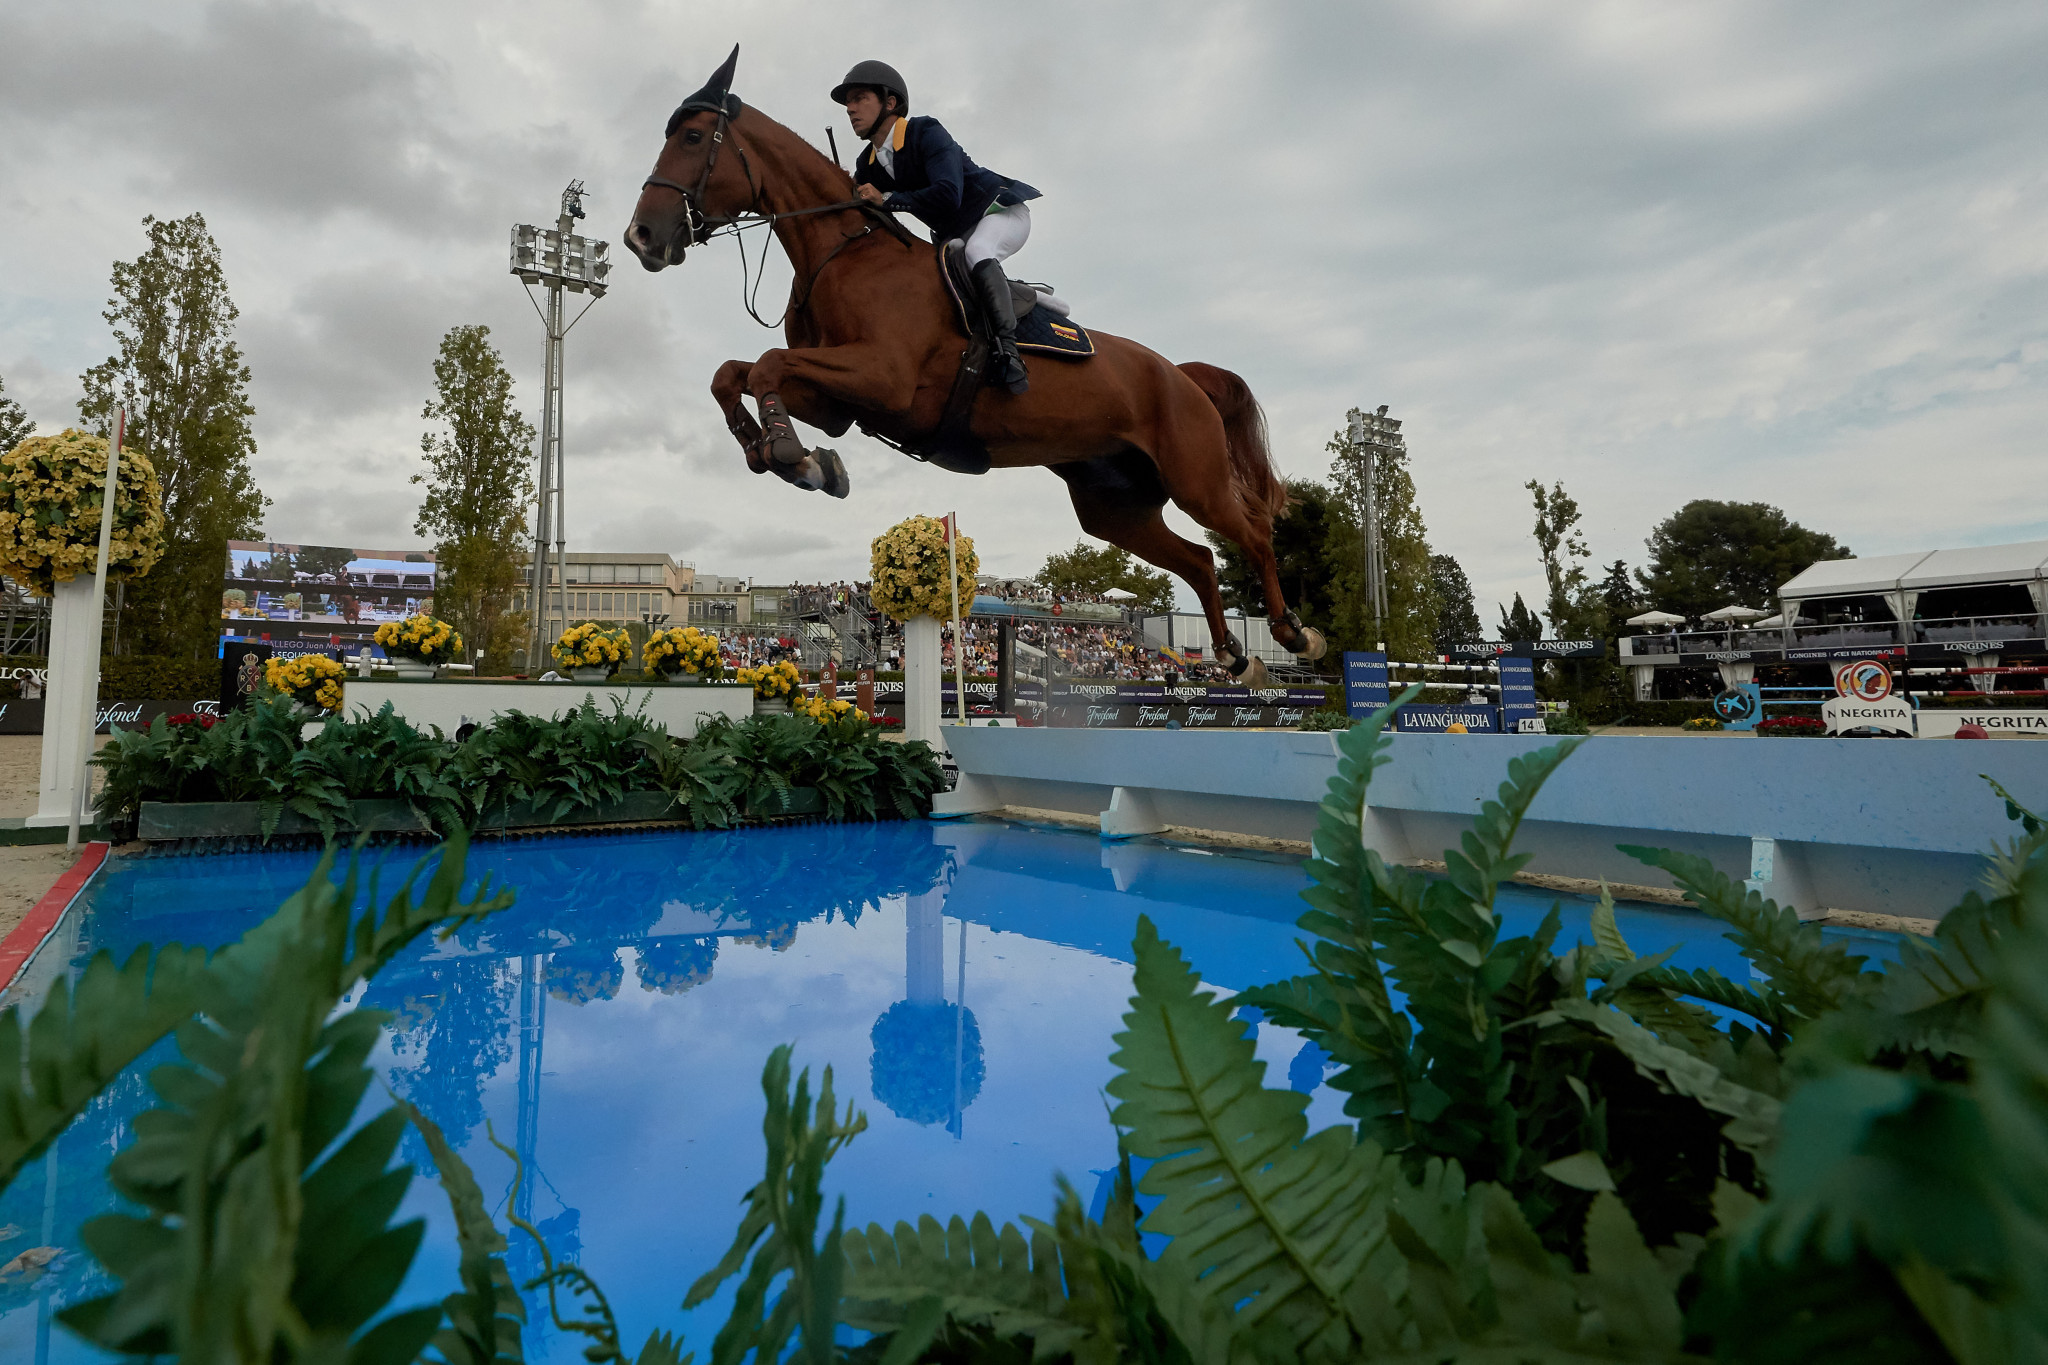 The FEI Board approved rules for the 2020 FEI Jumping Nations Cup ©Getty Images